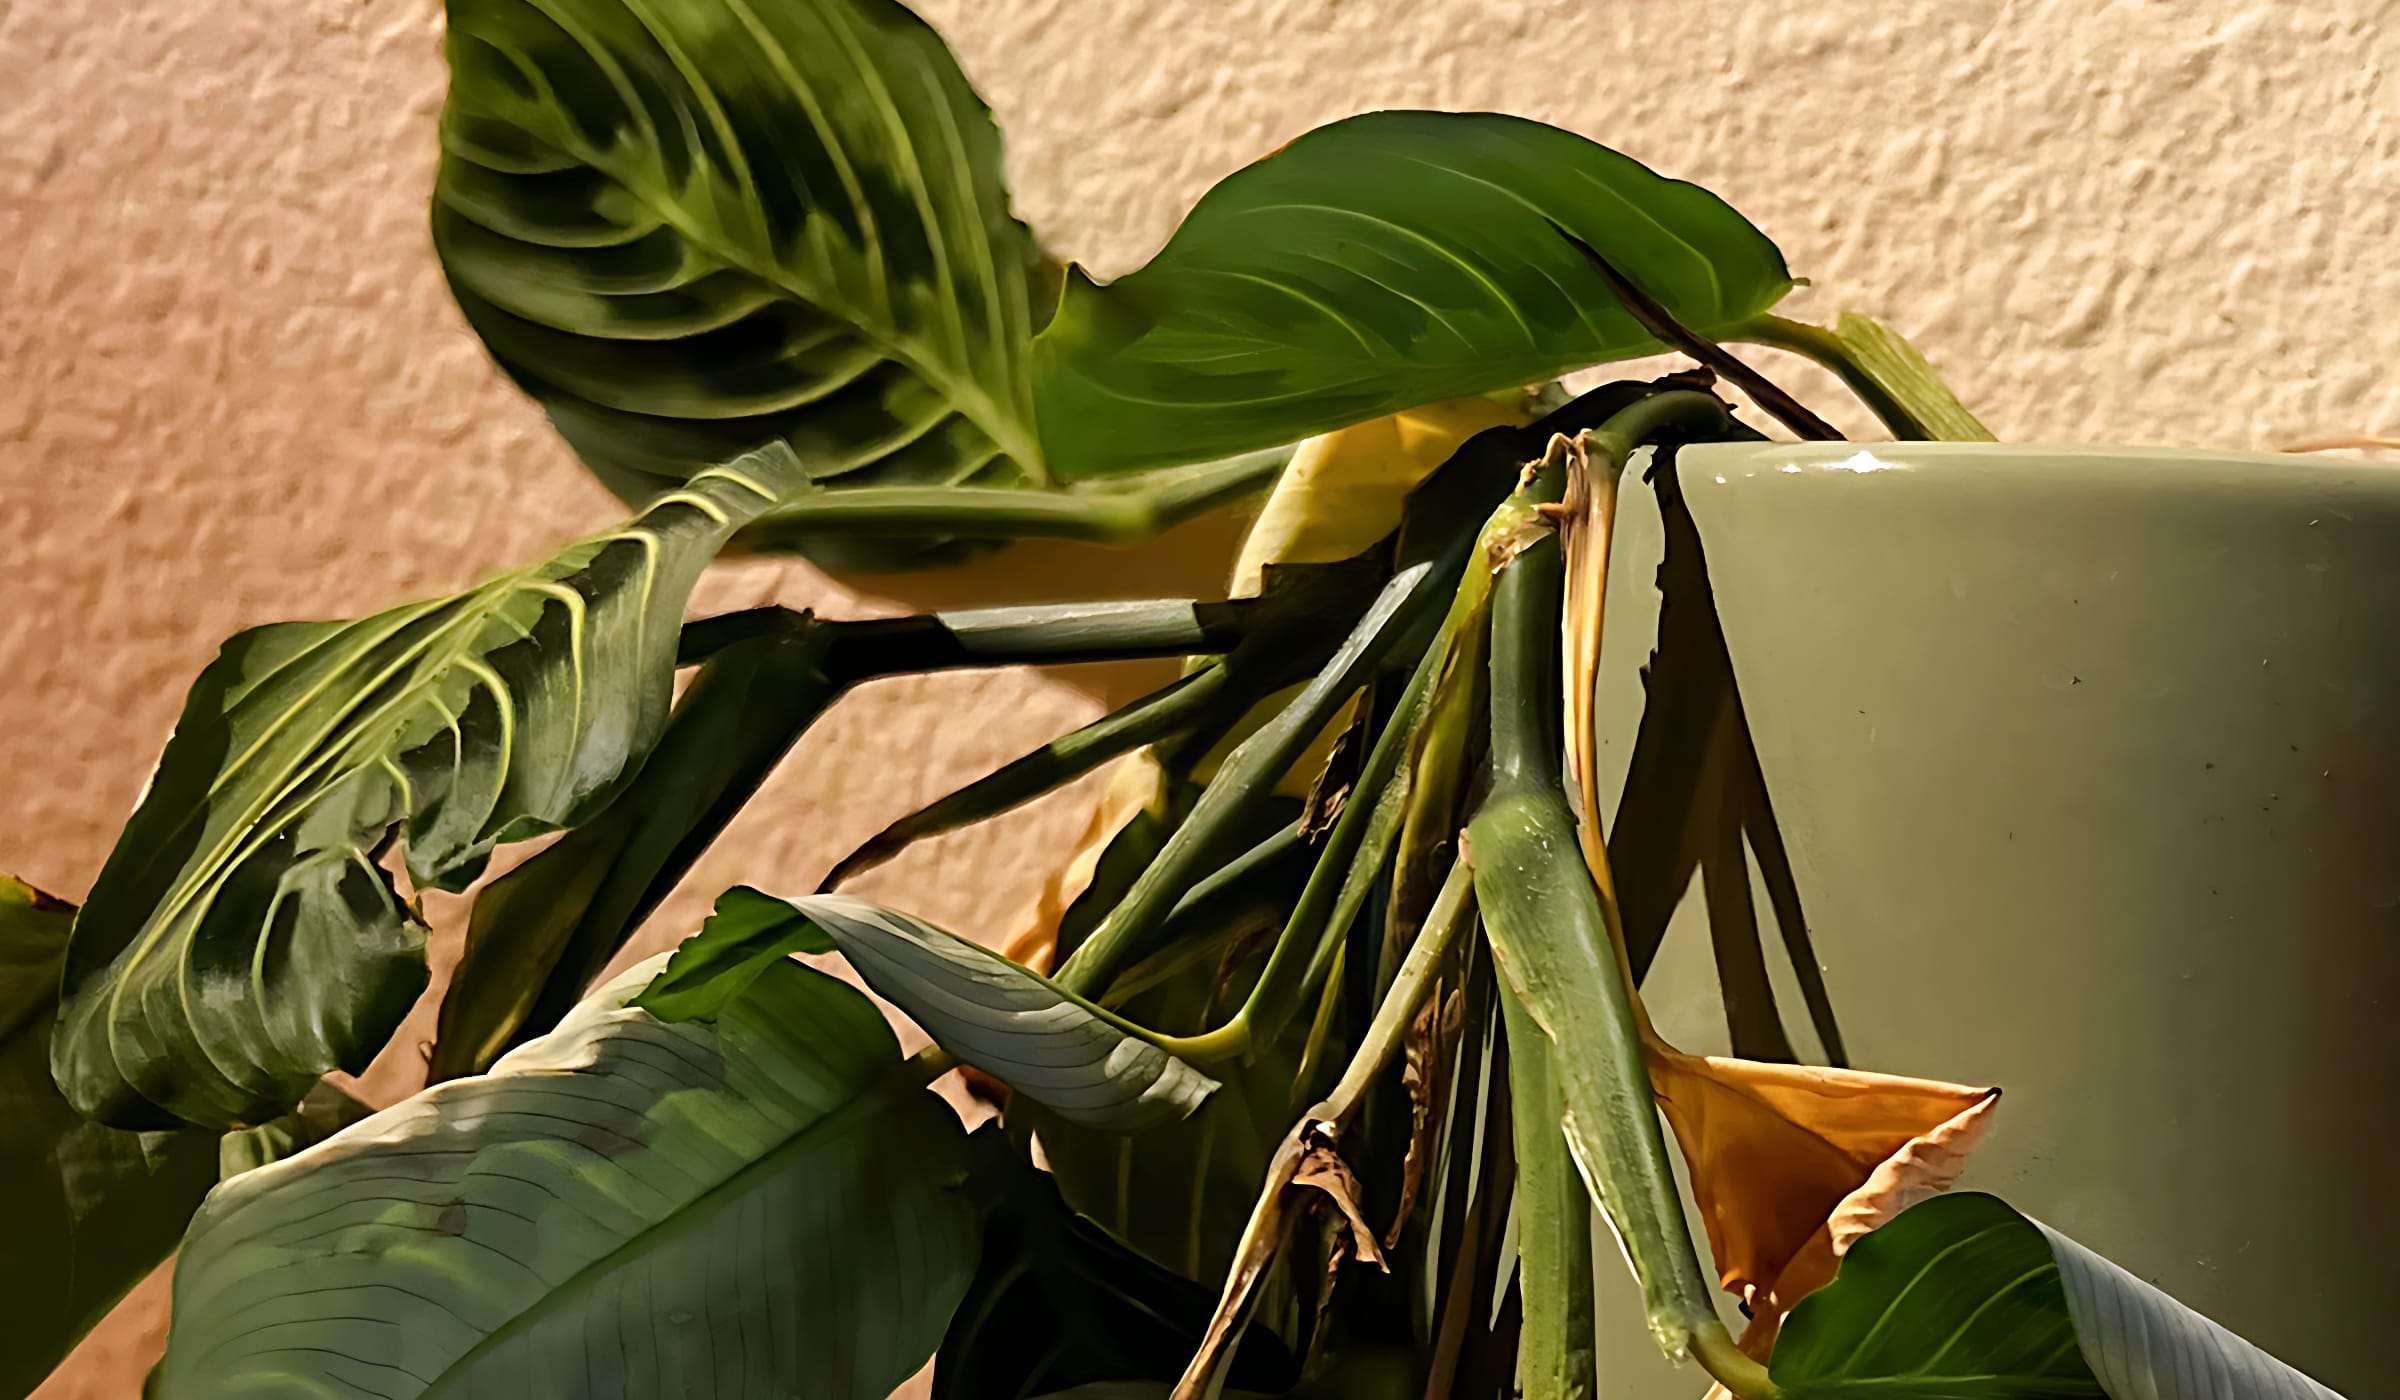 Reasons for a Droopy Prayer Plant